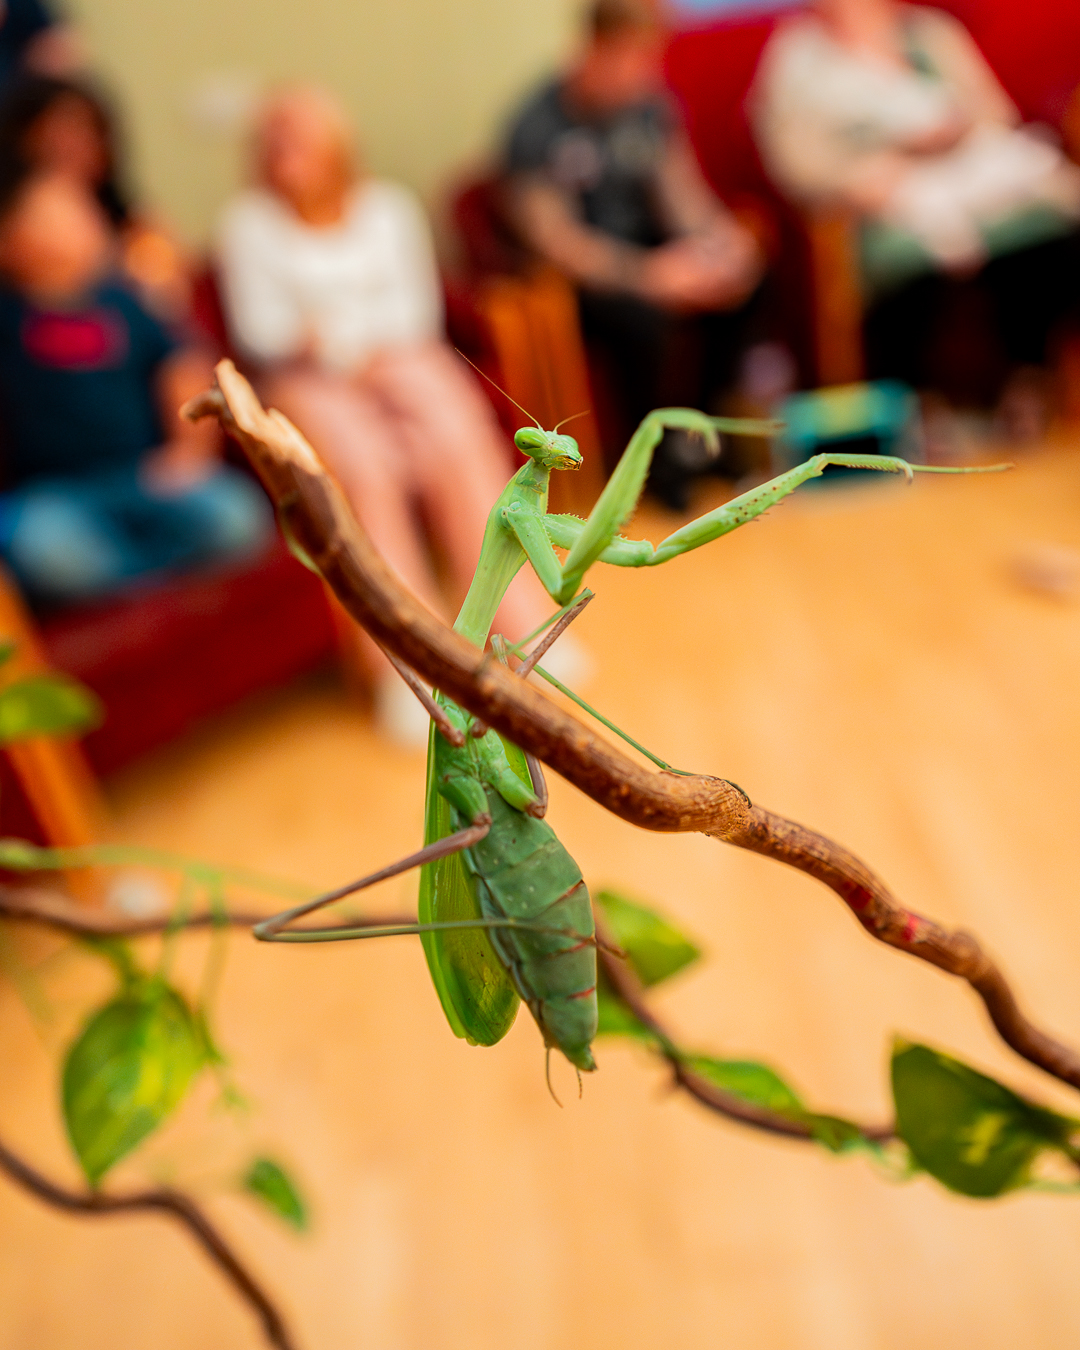 A green praying mantis is on a twig with its arms outstretched and the background is blurry.